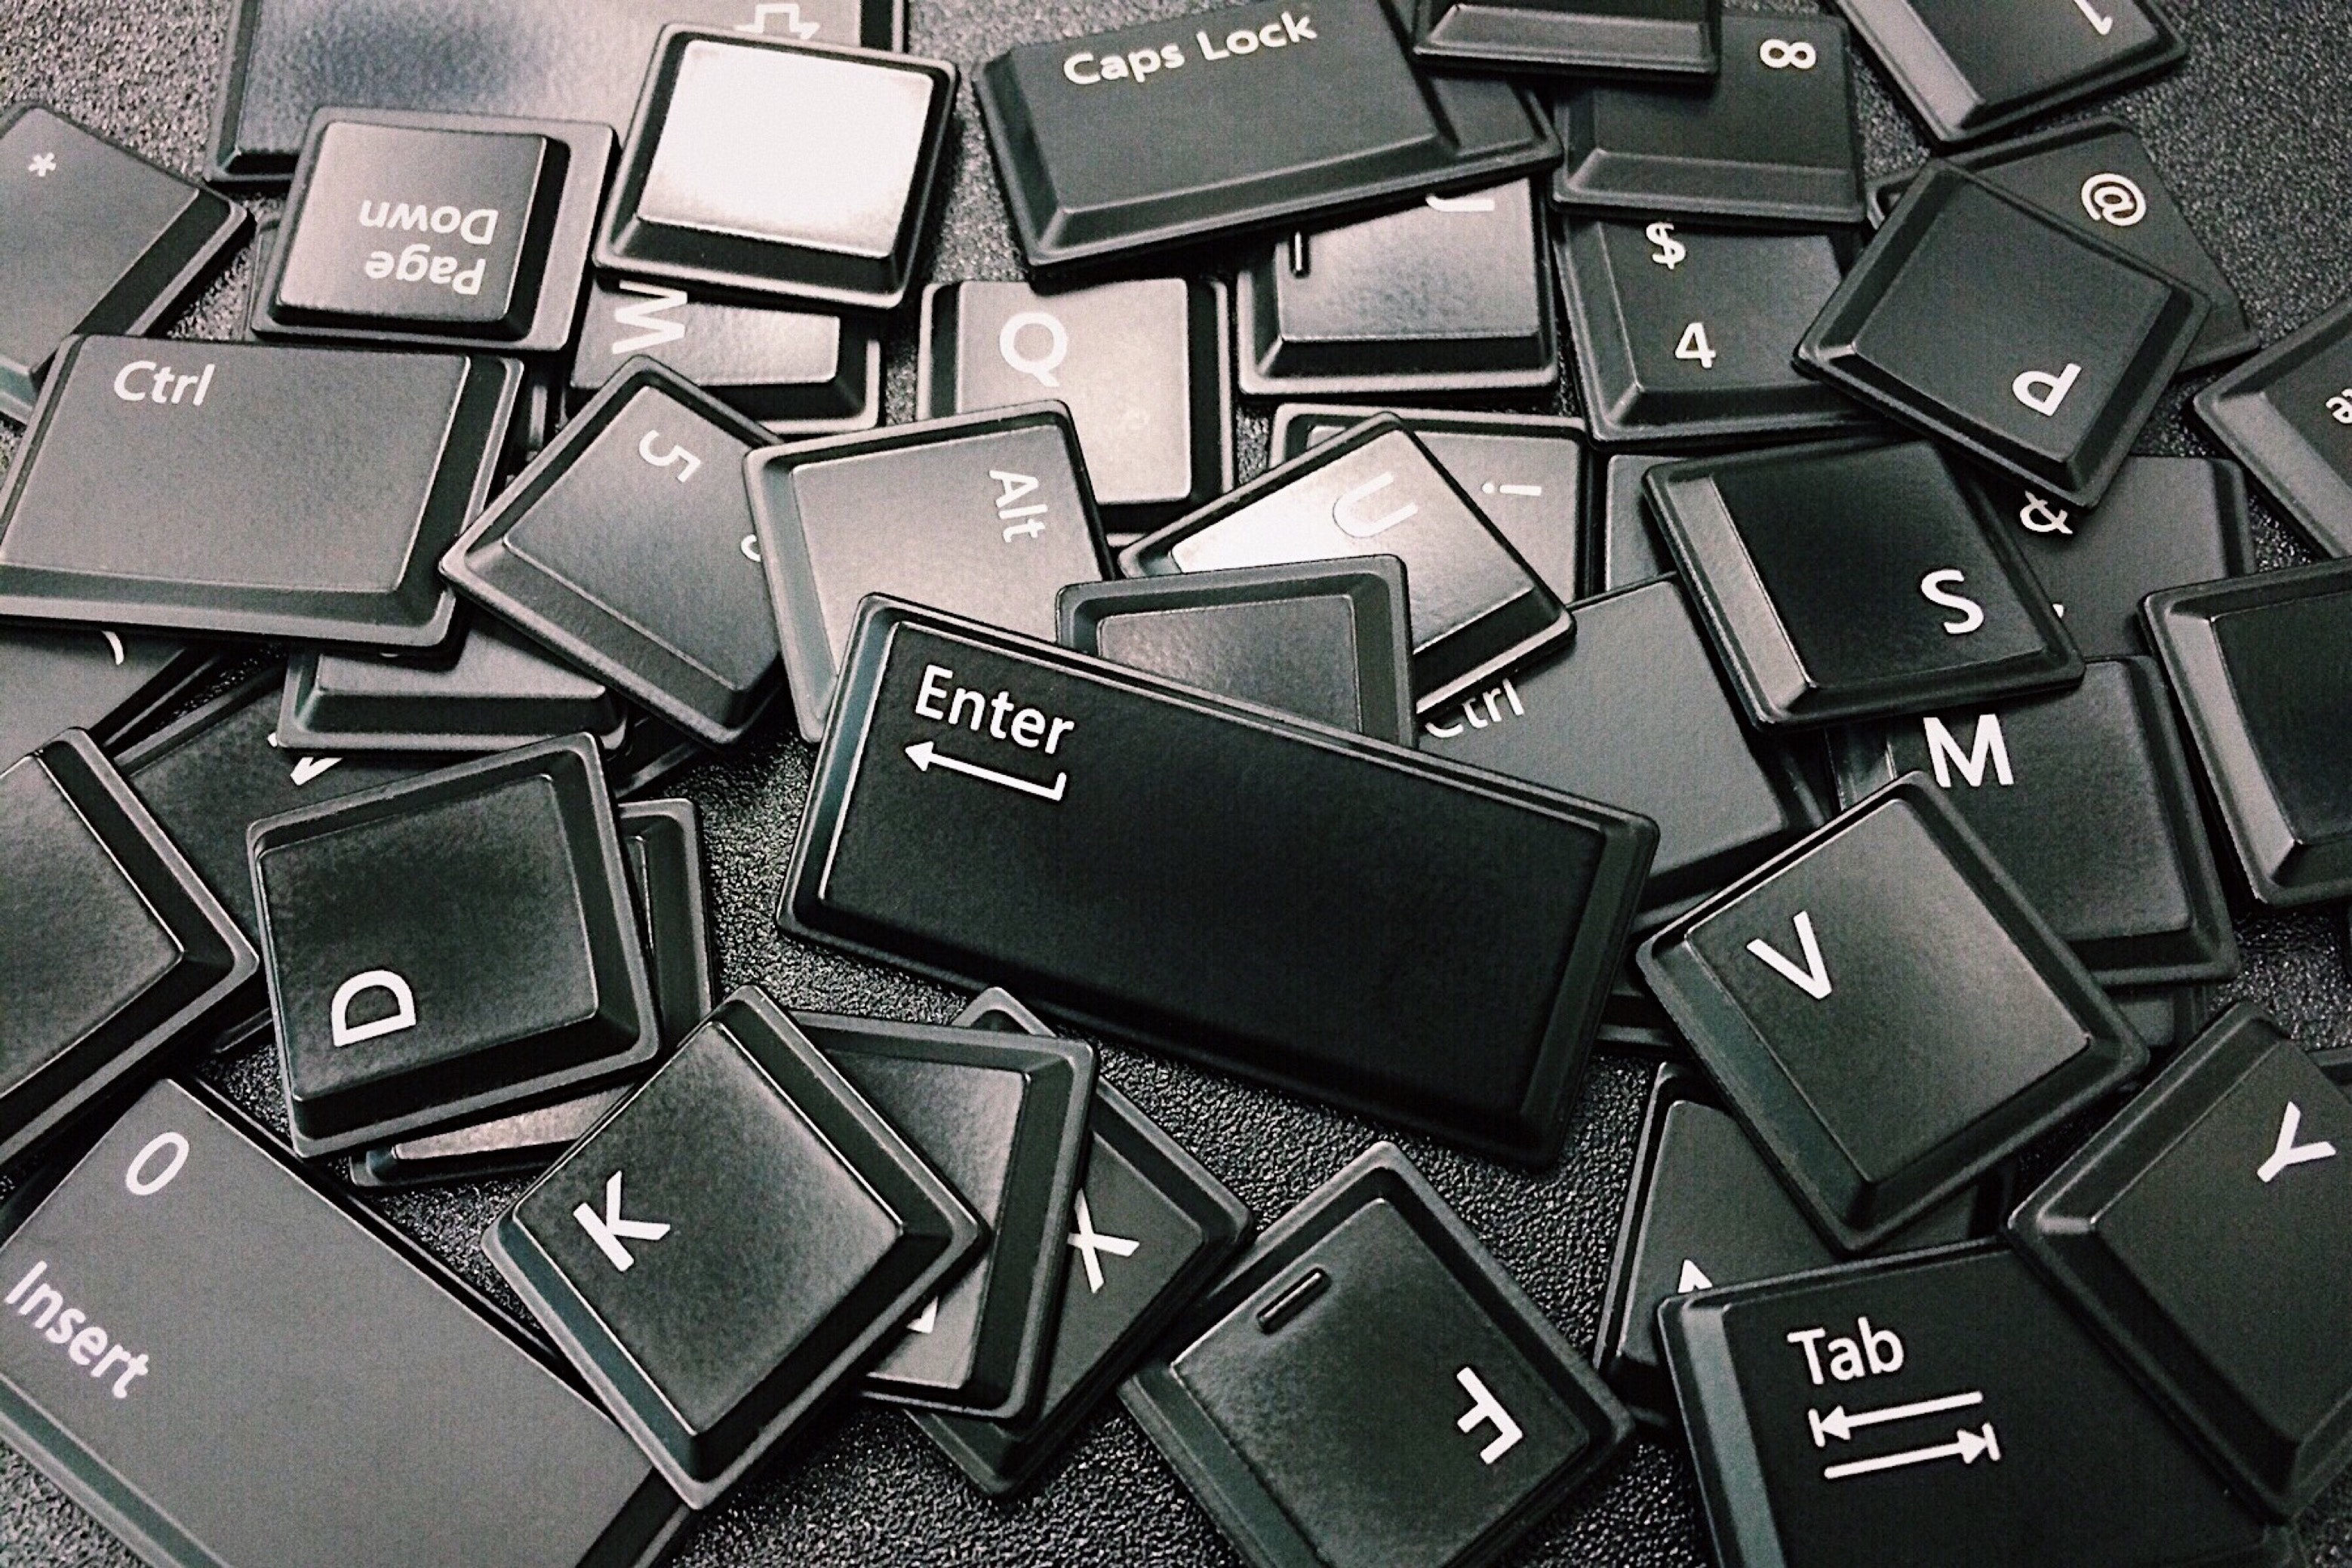 The keys can be washed separately, but they must be completely dried before assembling the keyboard (Photo: pixbay)